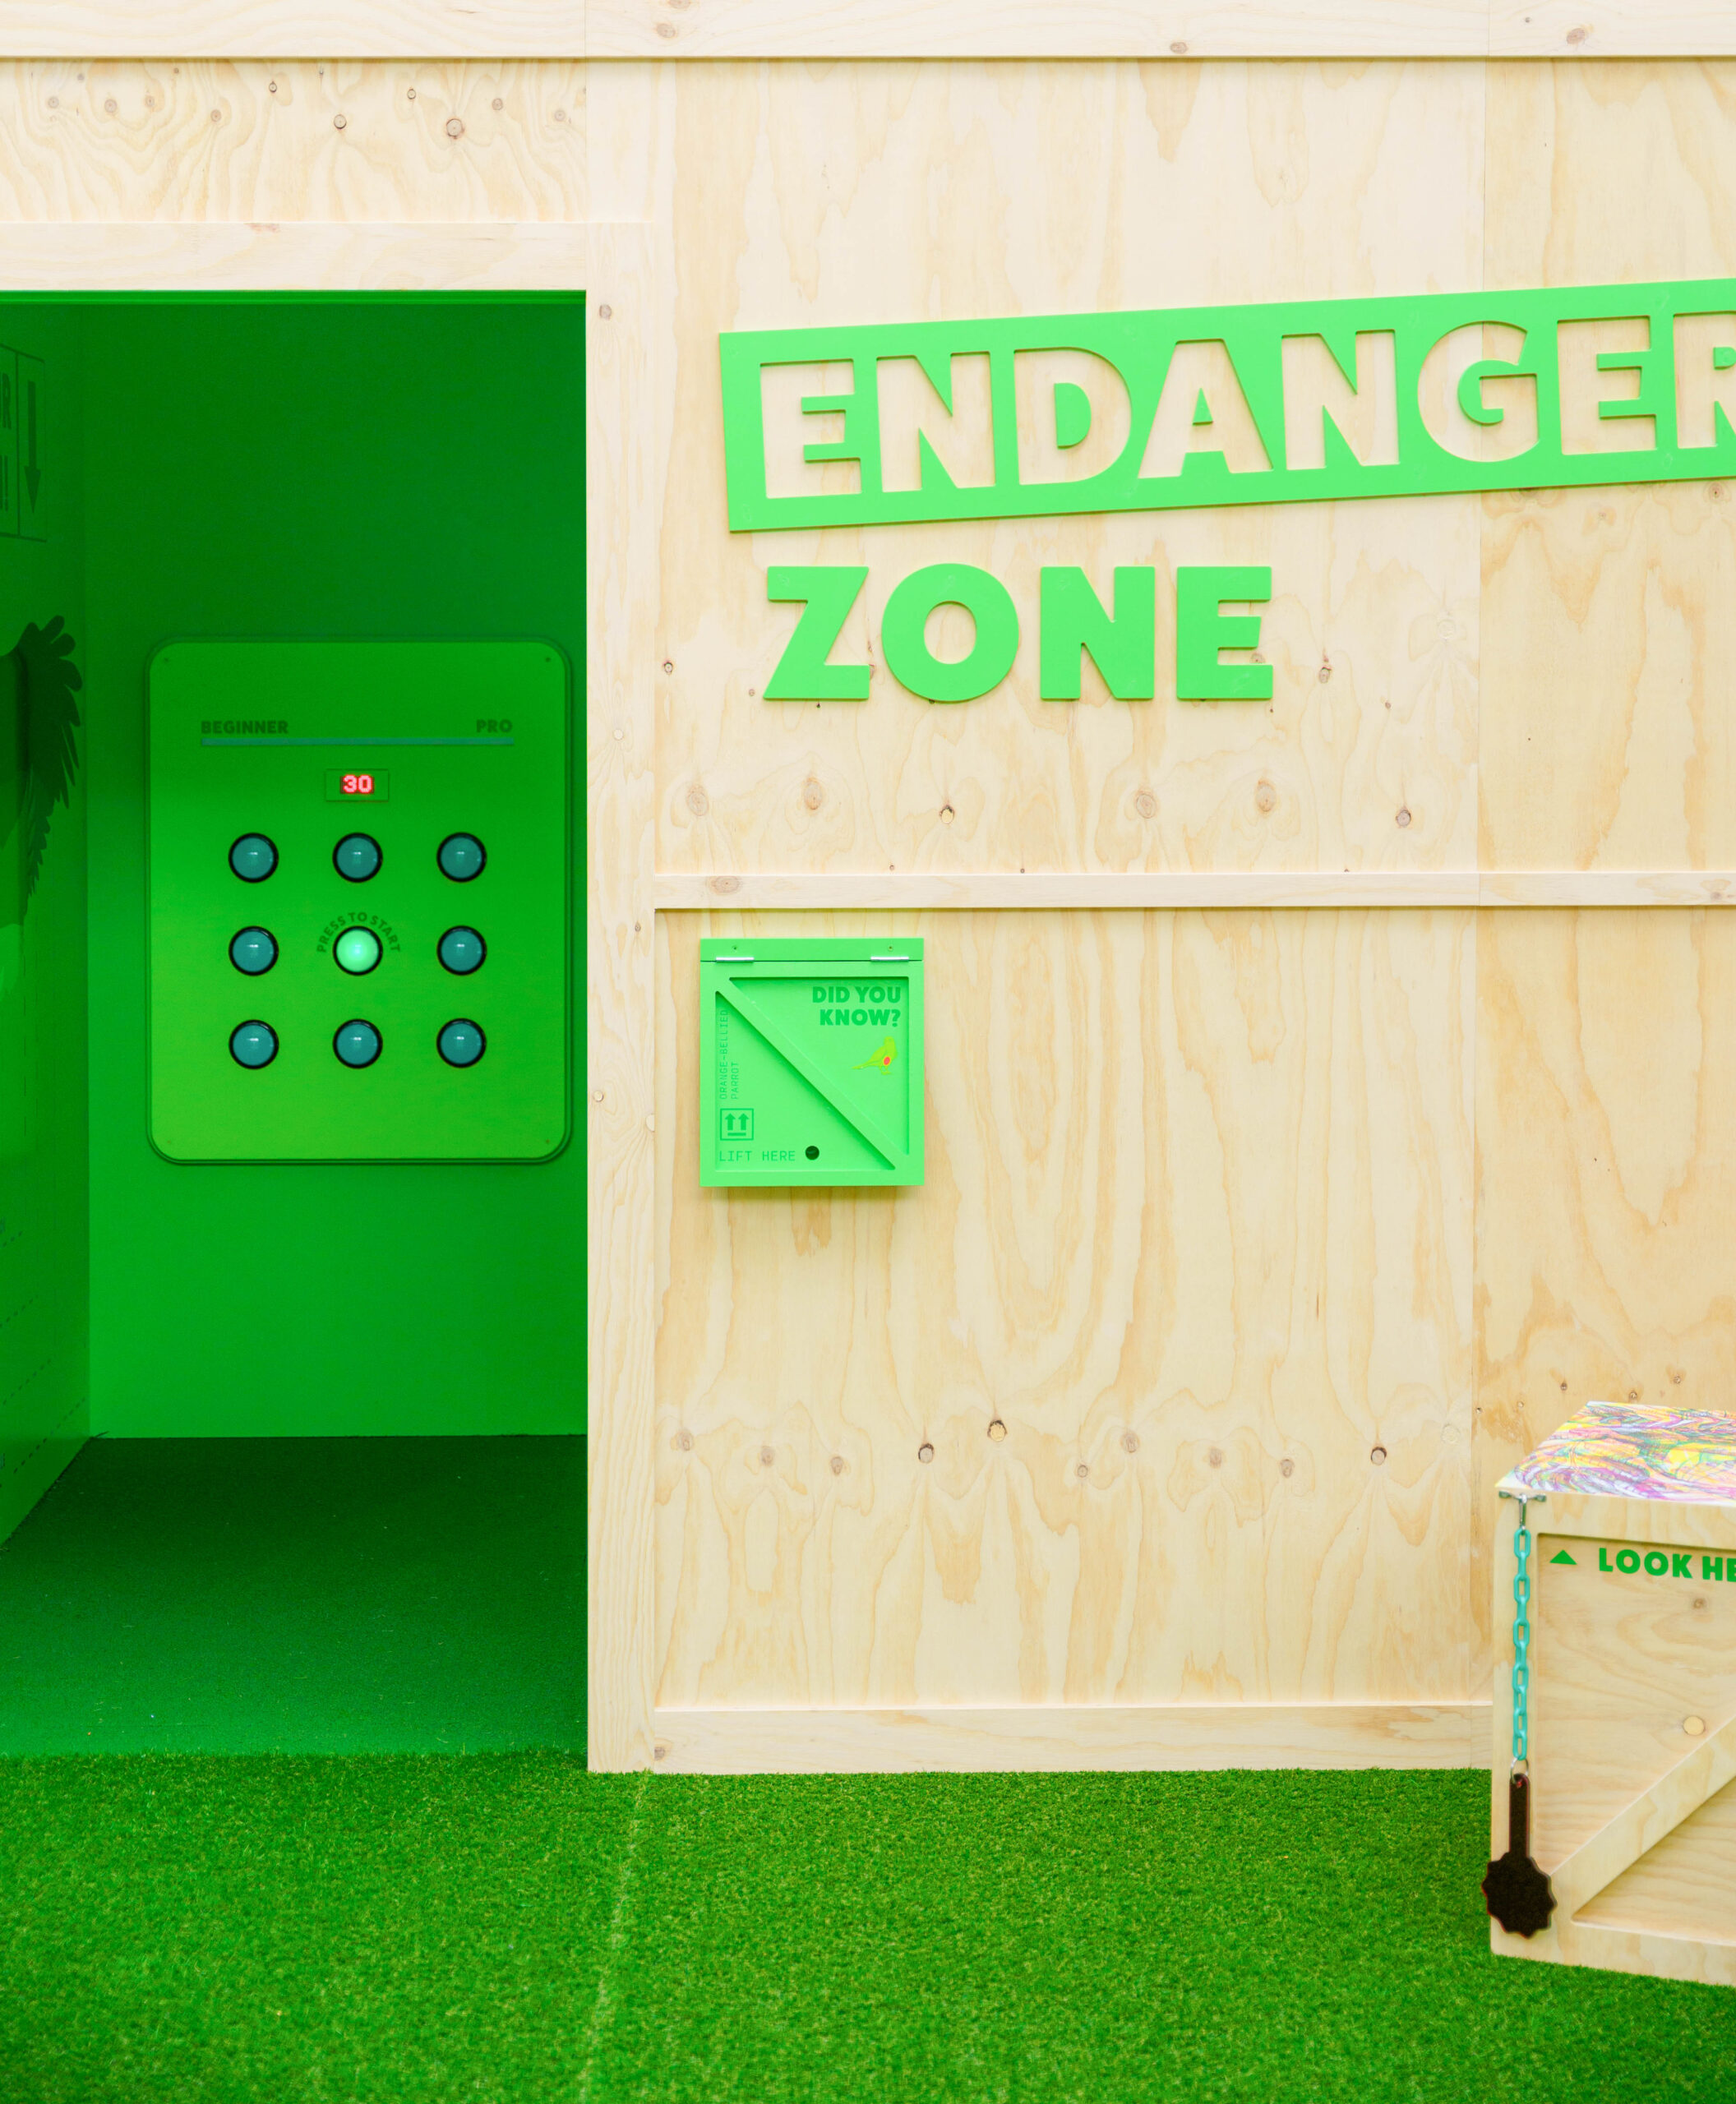 Entry to wooden and Green Enclosed Endangered Zone Interactive set.